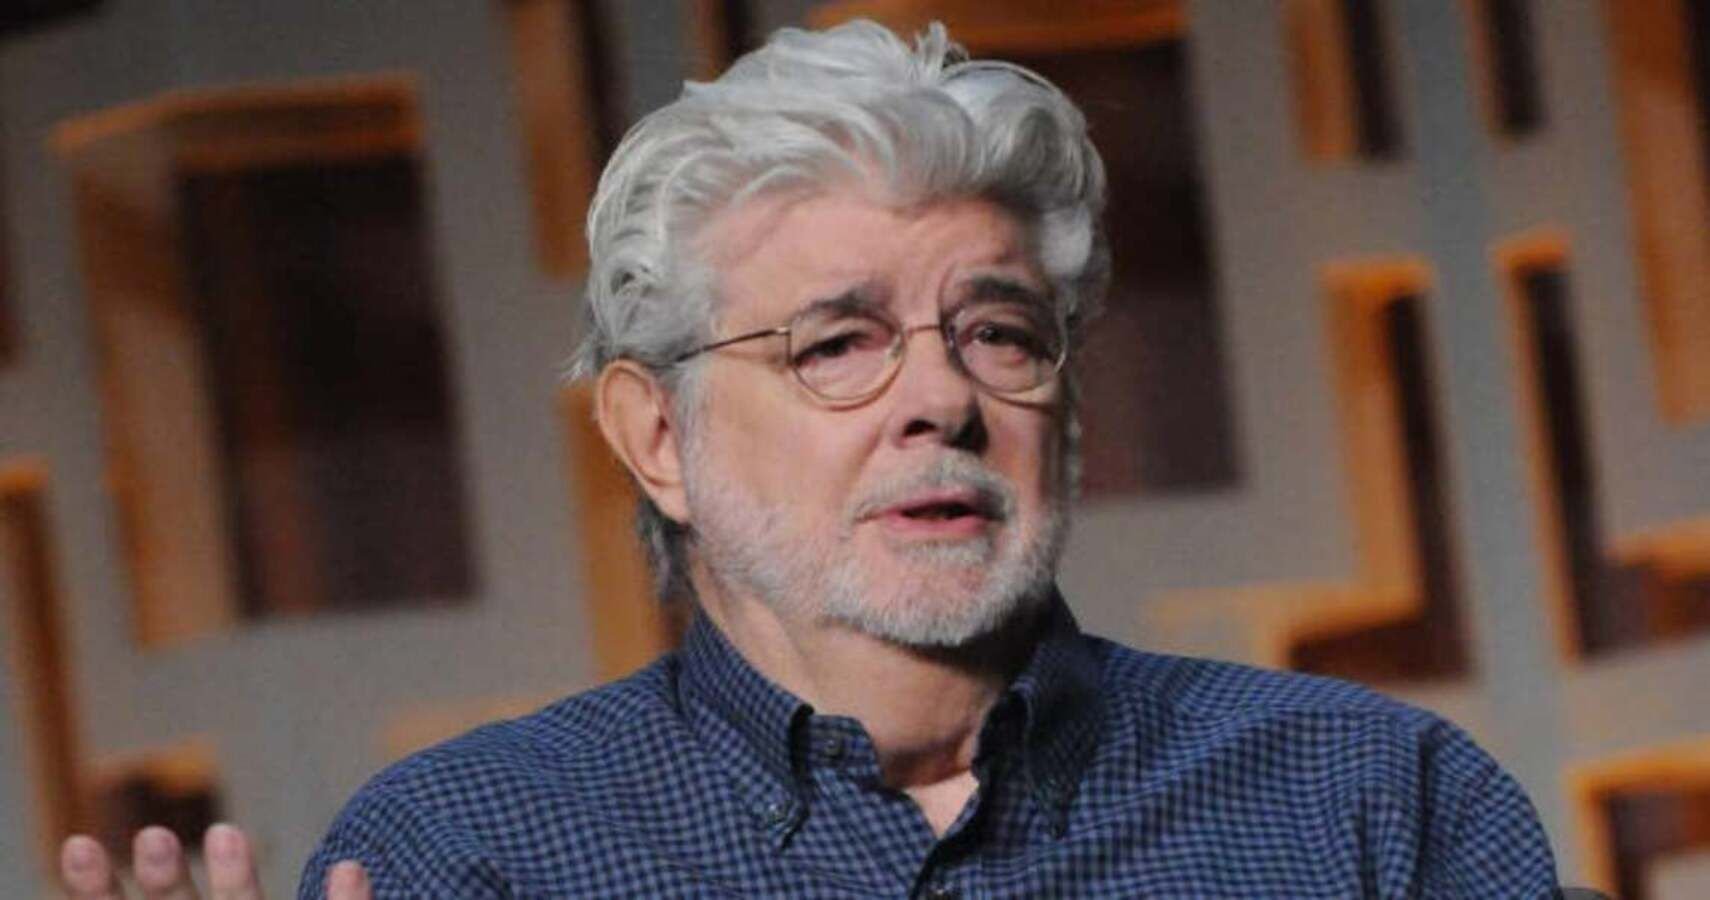 Disney CEO Says George Lucas Felt "Betrayed" By Plans For Star Wars Sequels